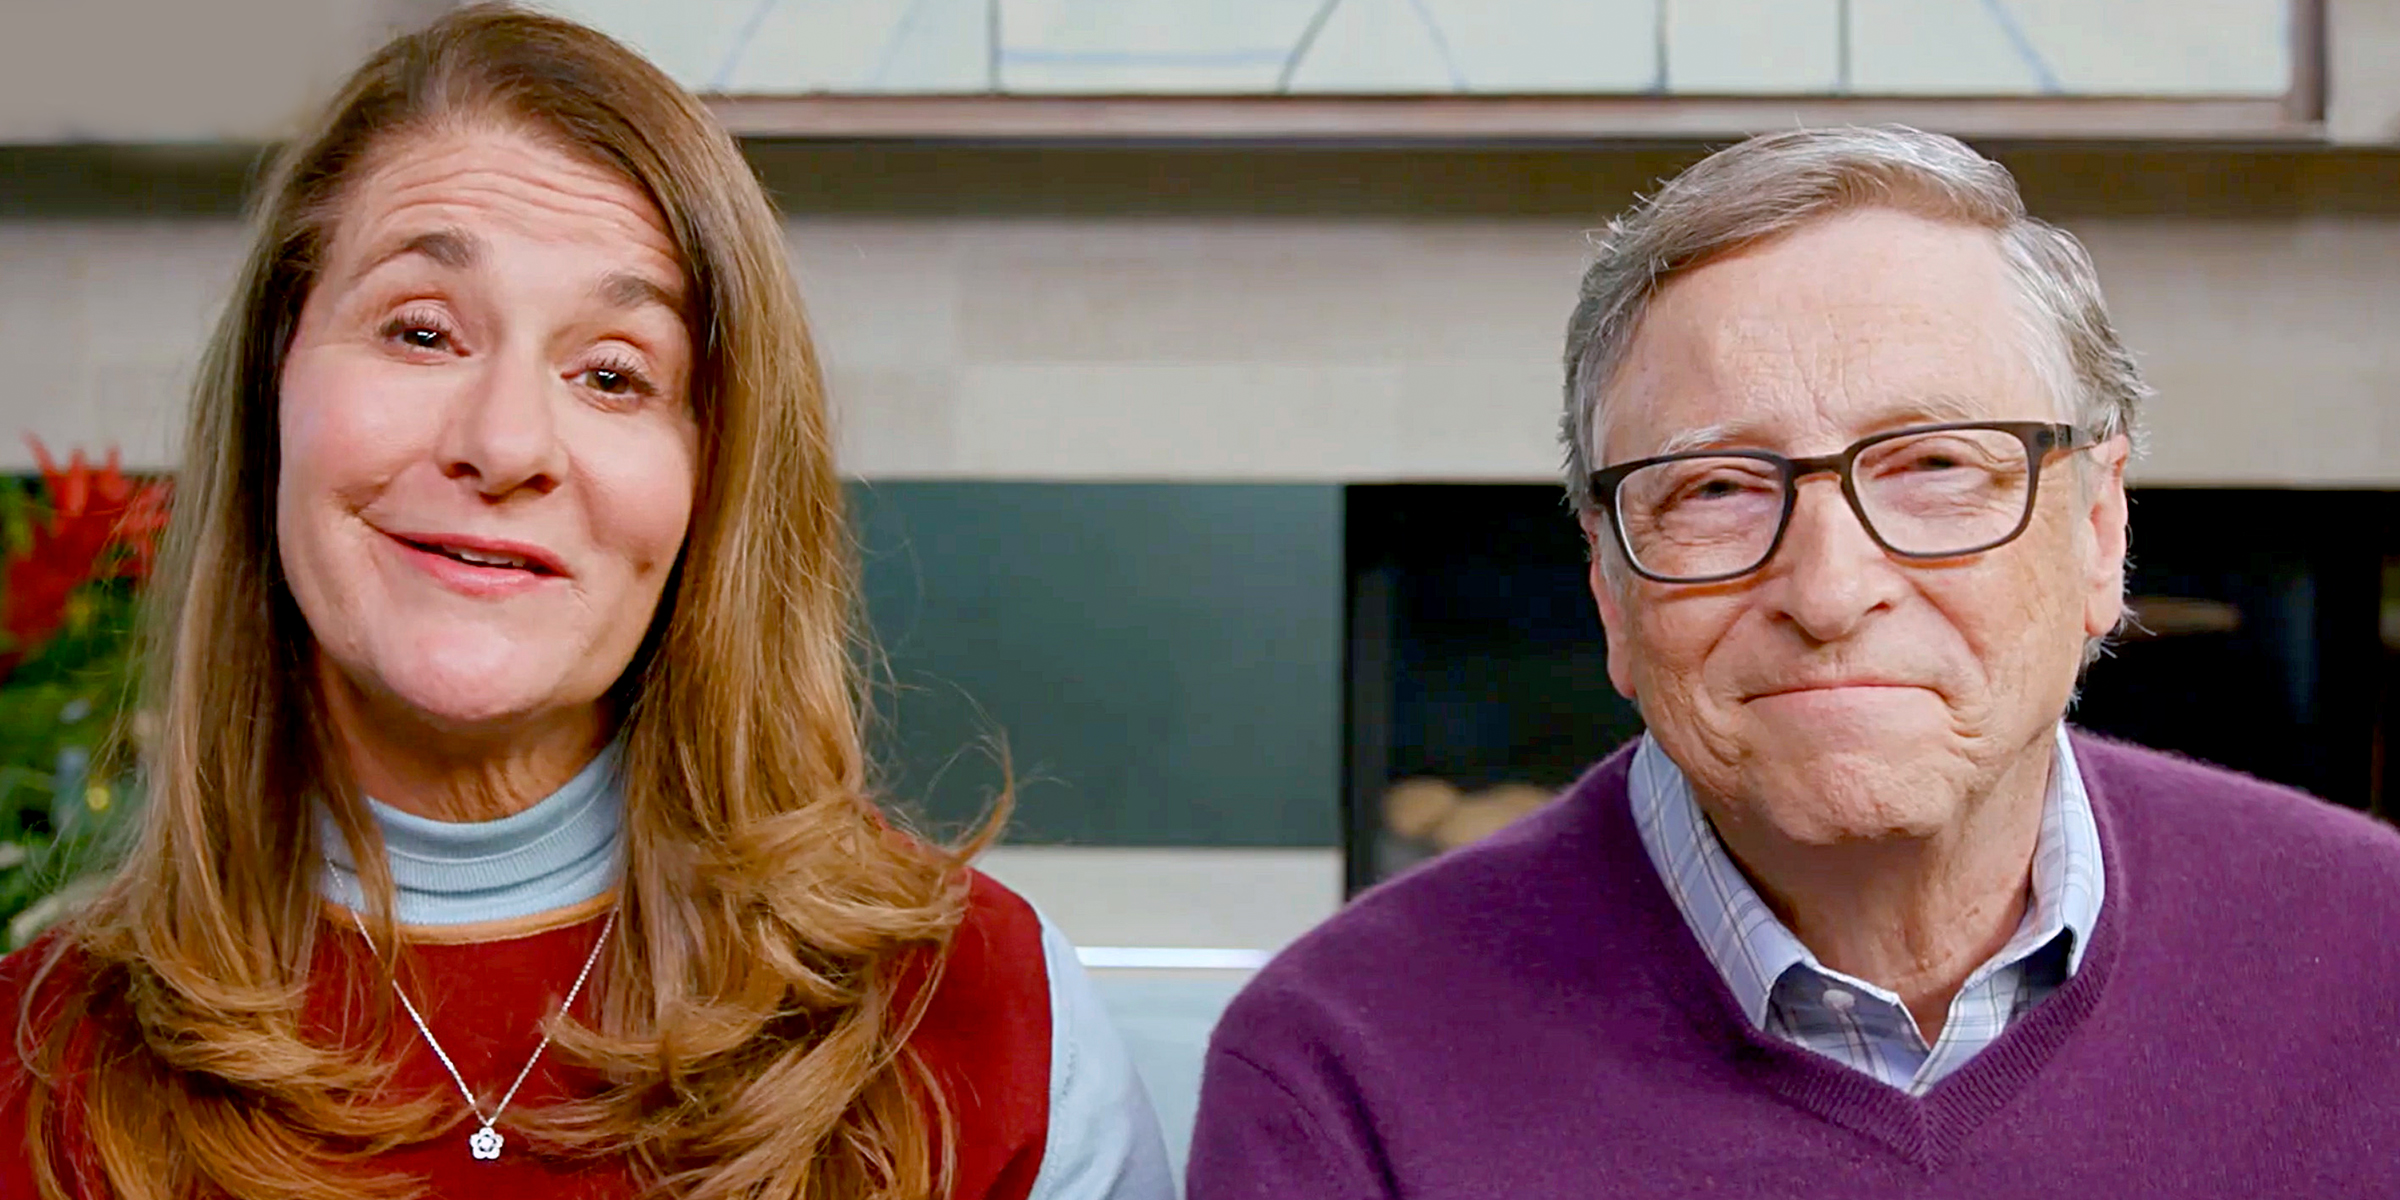 Melinda Gates and Bill Gates speak during "One World: Together At Home" presented by Global Citizen, on April, 18, 2020, at an unspecified location. | Source: Getty Images